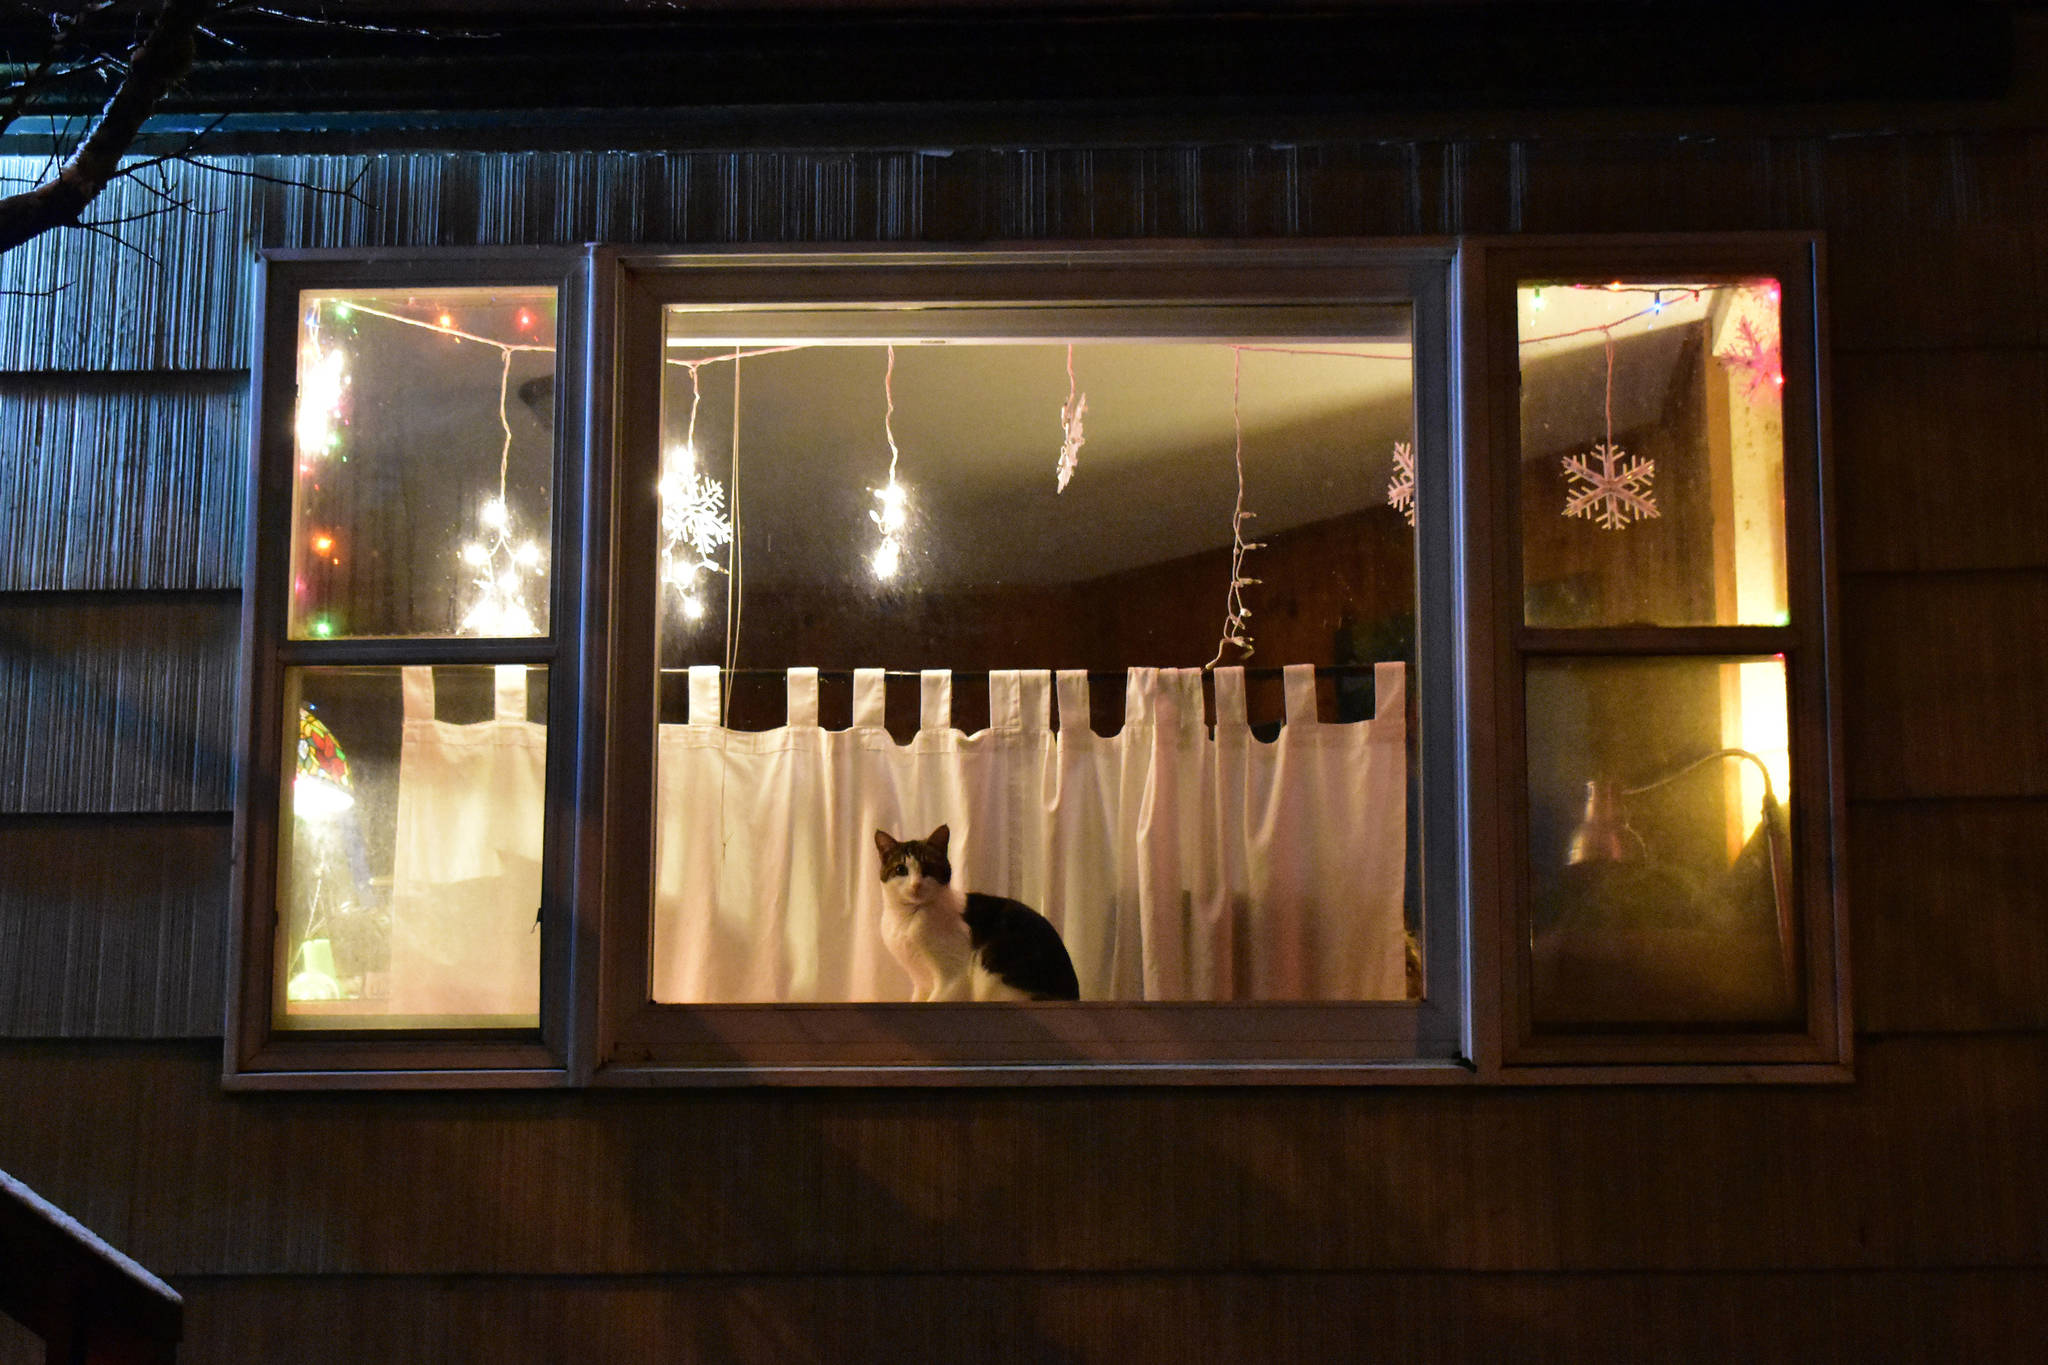 A cat sits in a window at a house in Douglas on Sat. Dec. 21, 2019. (Peter Segall | Juneau Empire)